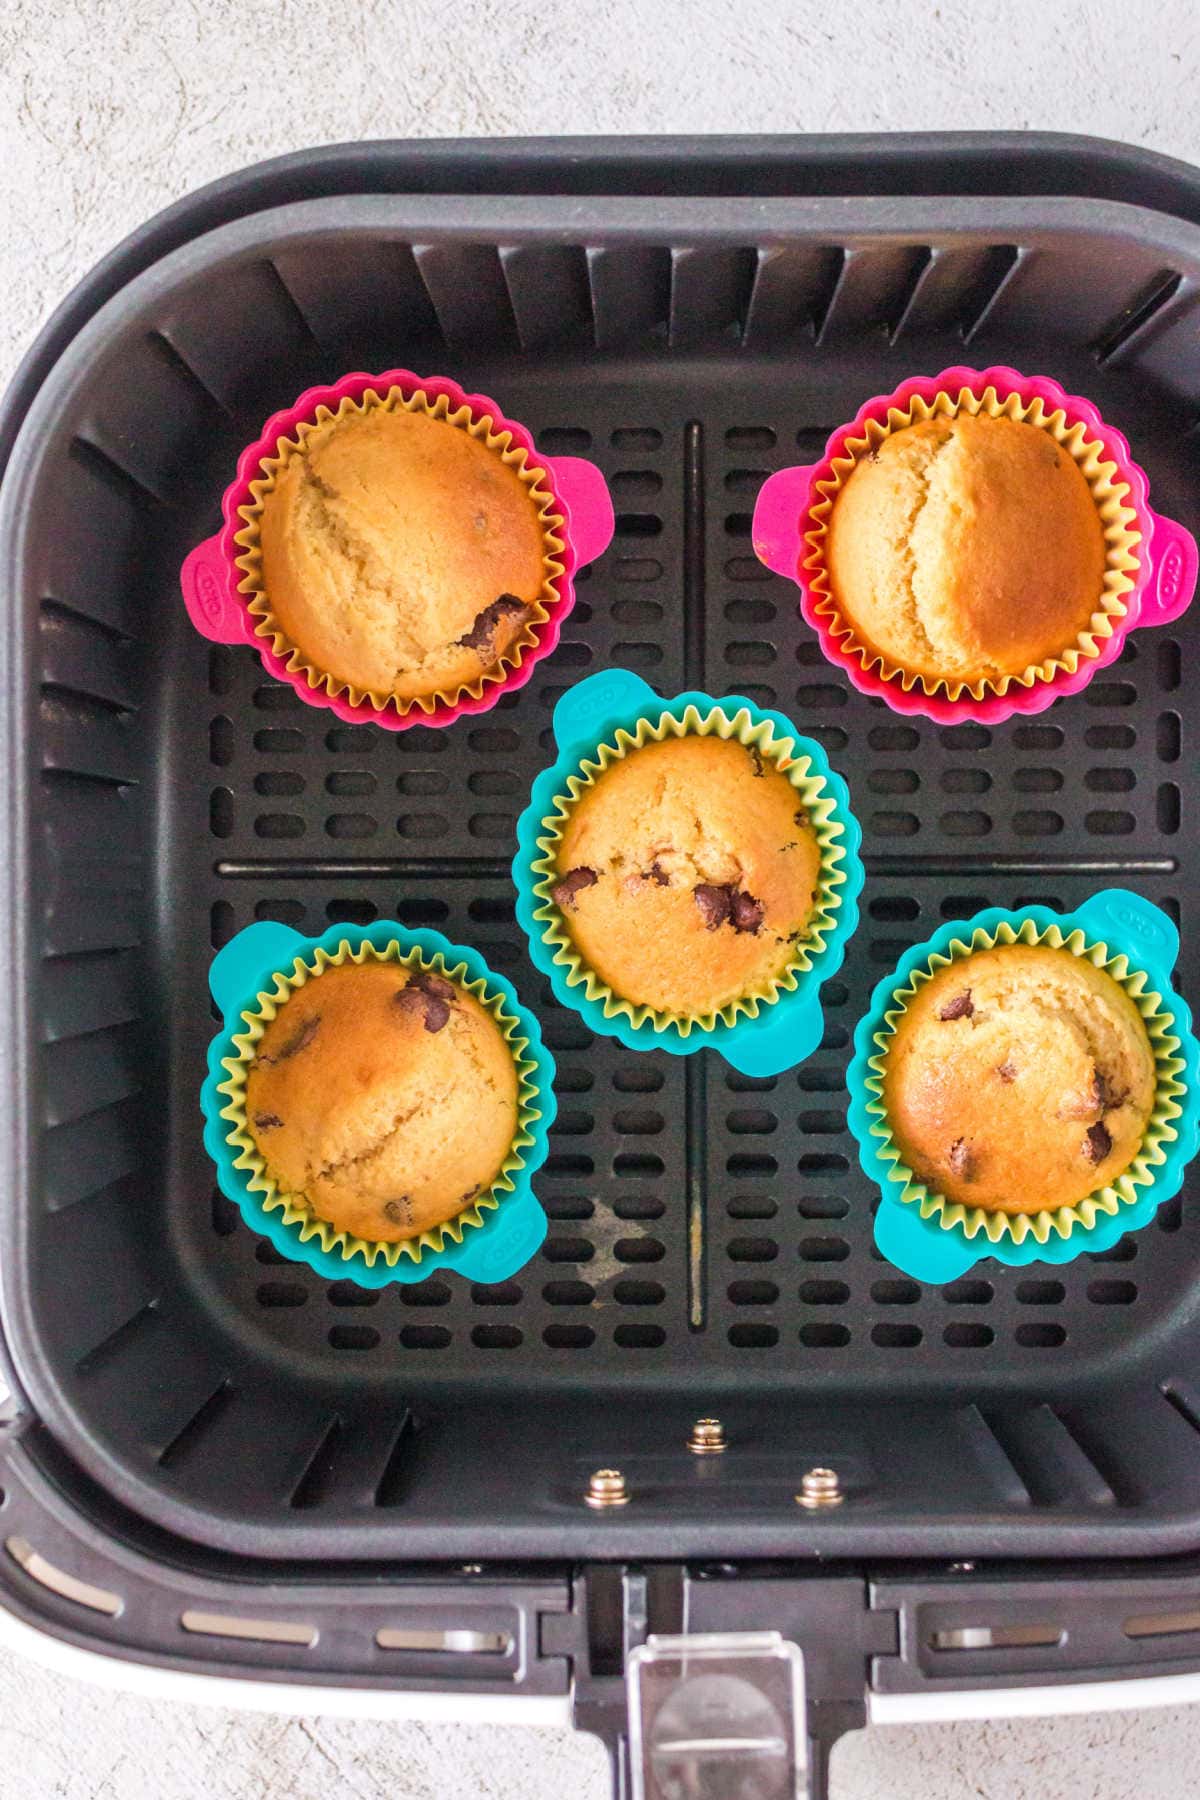 Overhead view of finished chocolate chip muffins in the air fryer.